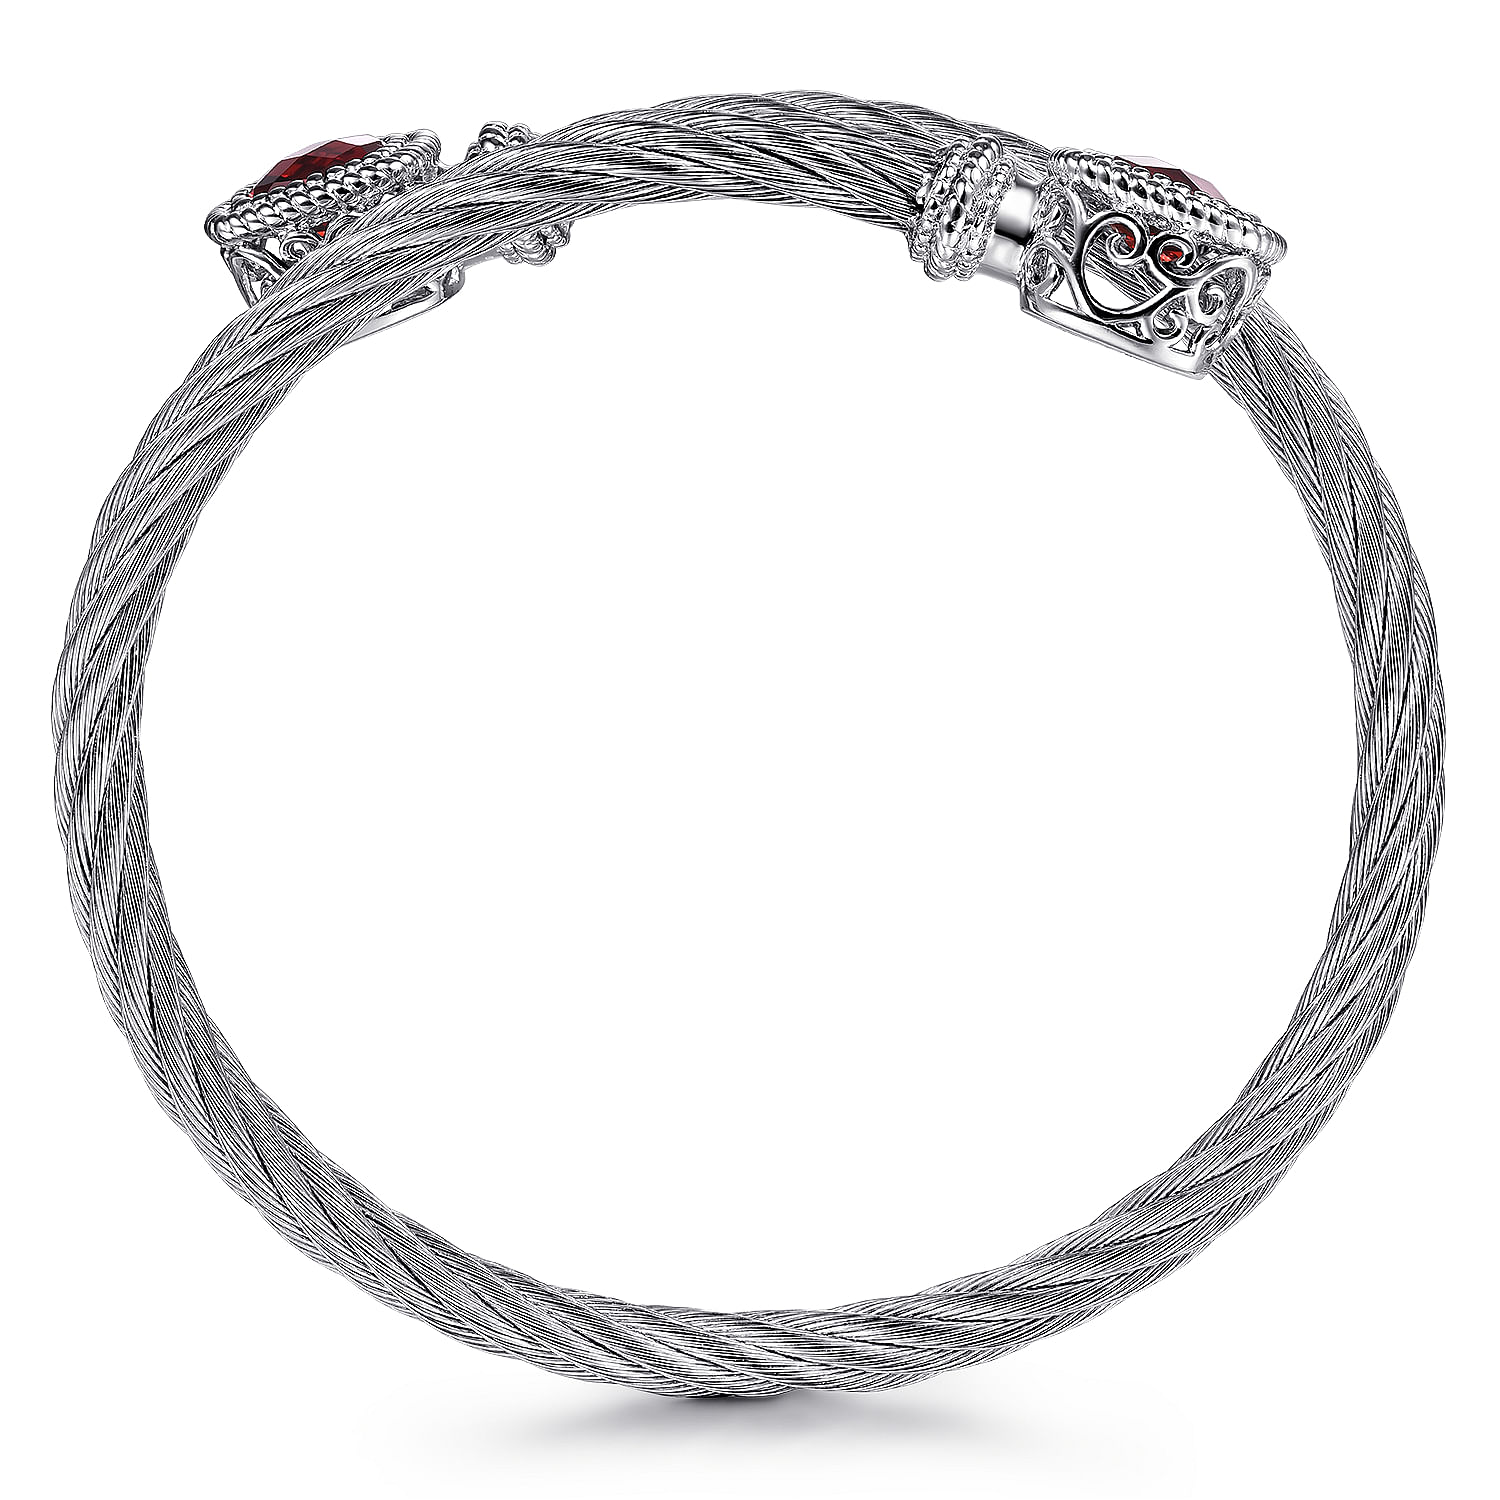 Sterling Silver and Twisted Cable Stainless Steel Garnet Stone Bypass Bangle